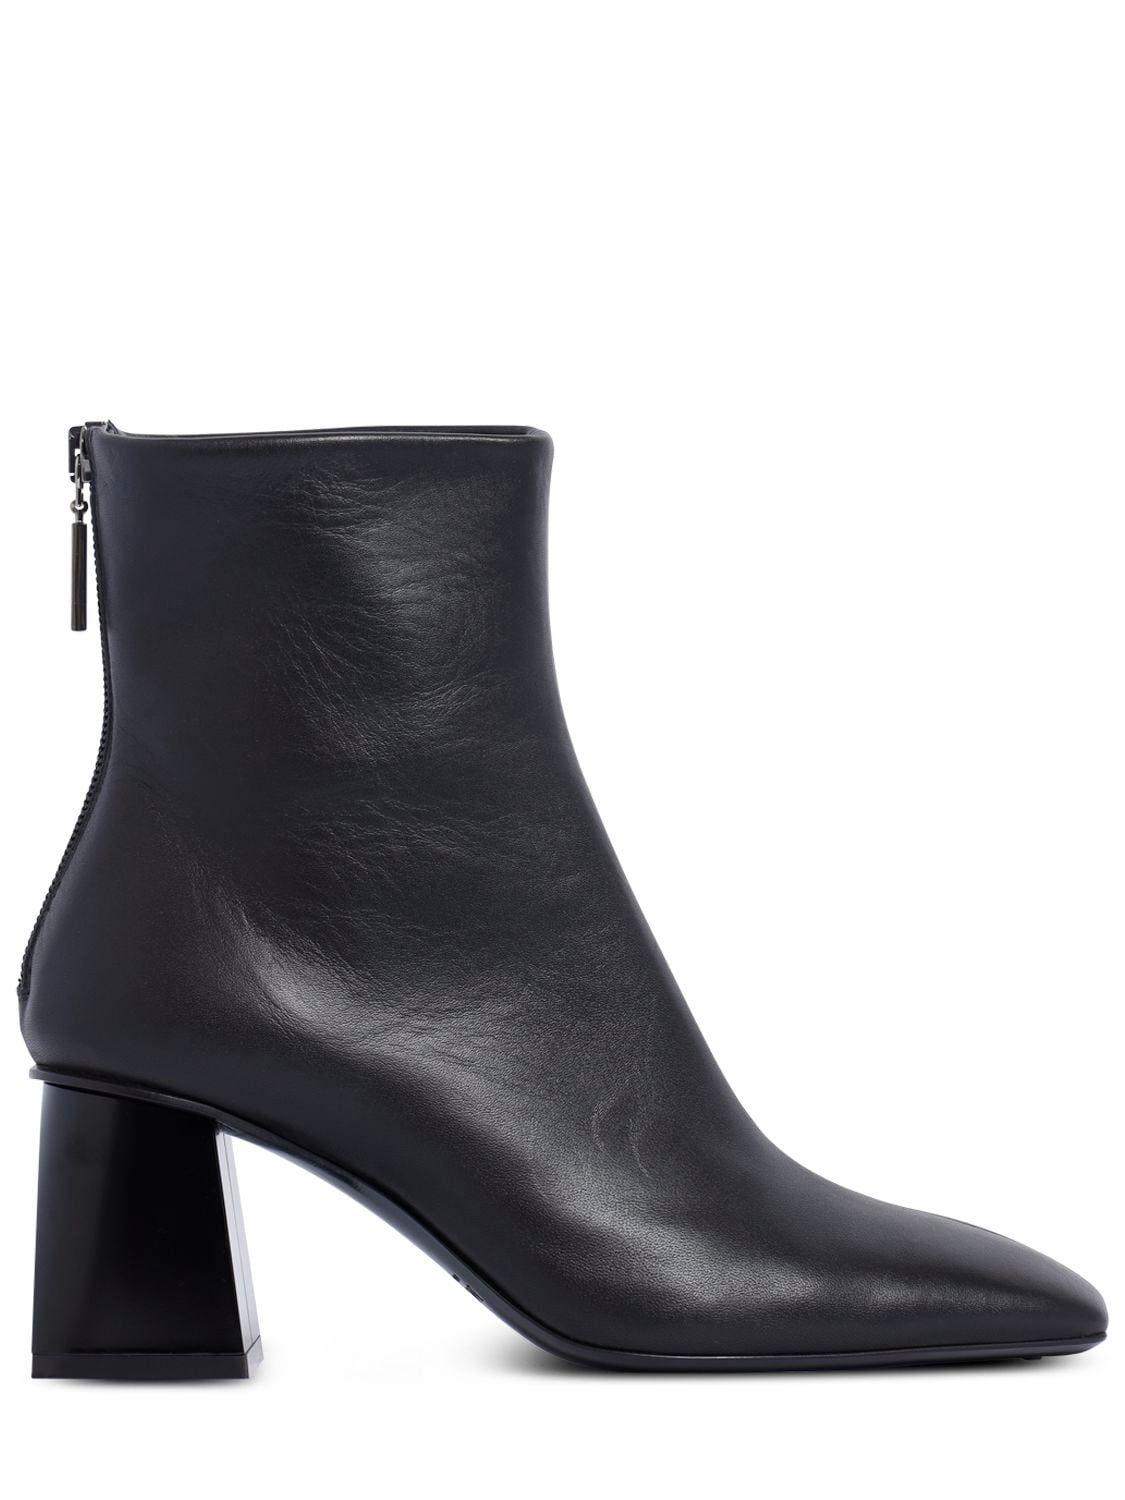 Max Mara 70mm Abby Leather Ankle Boots in Black | Lyst